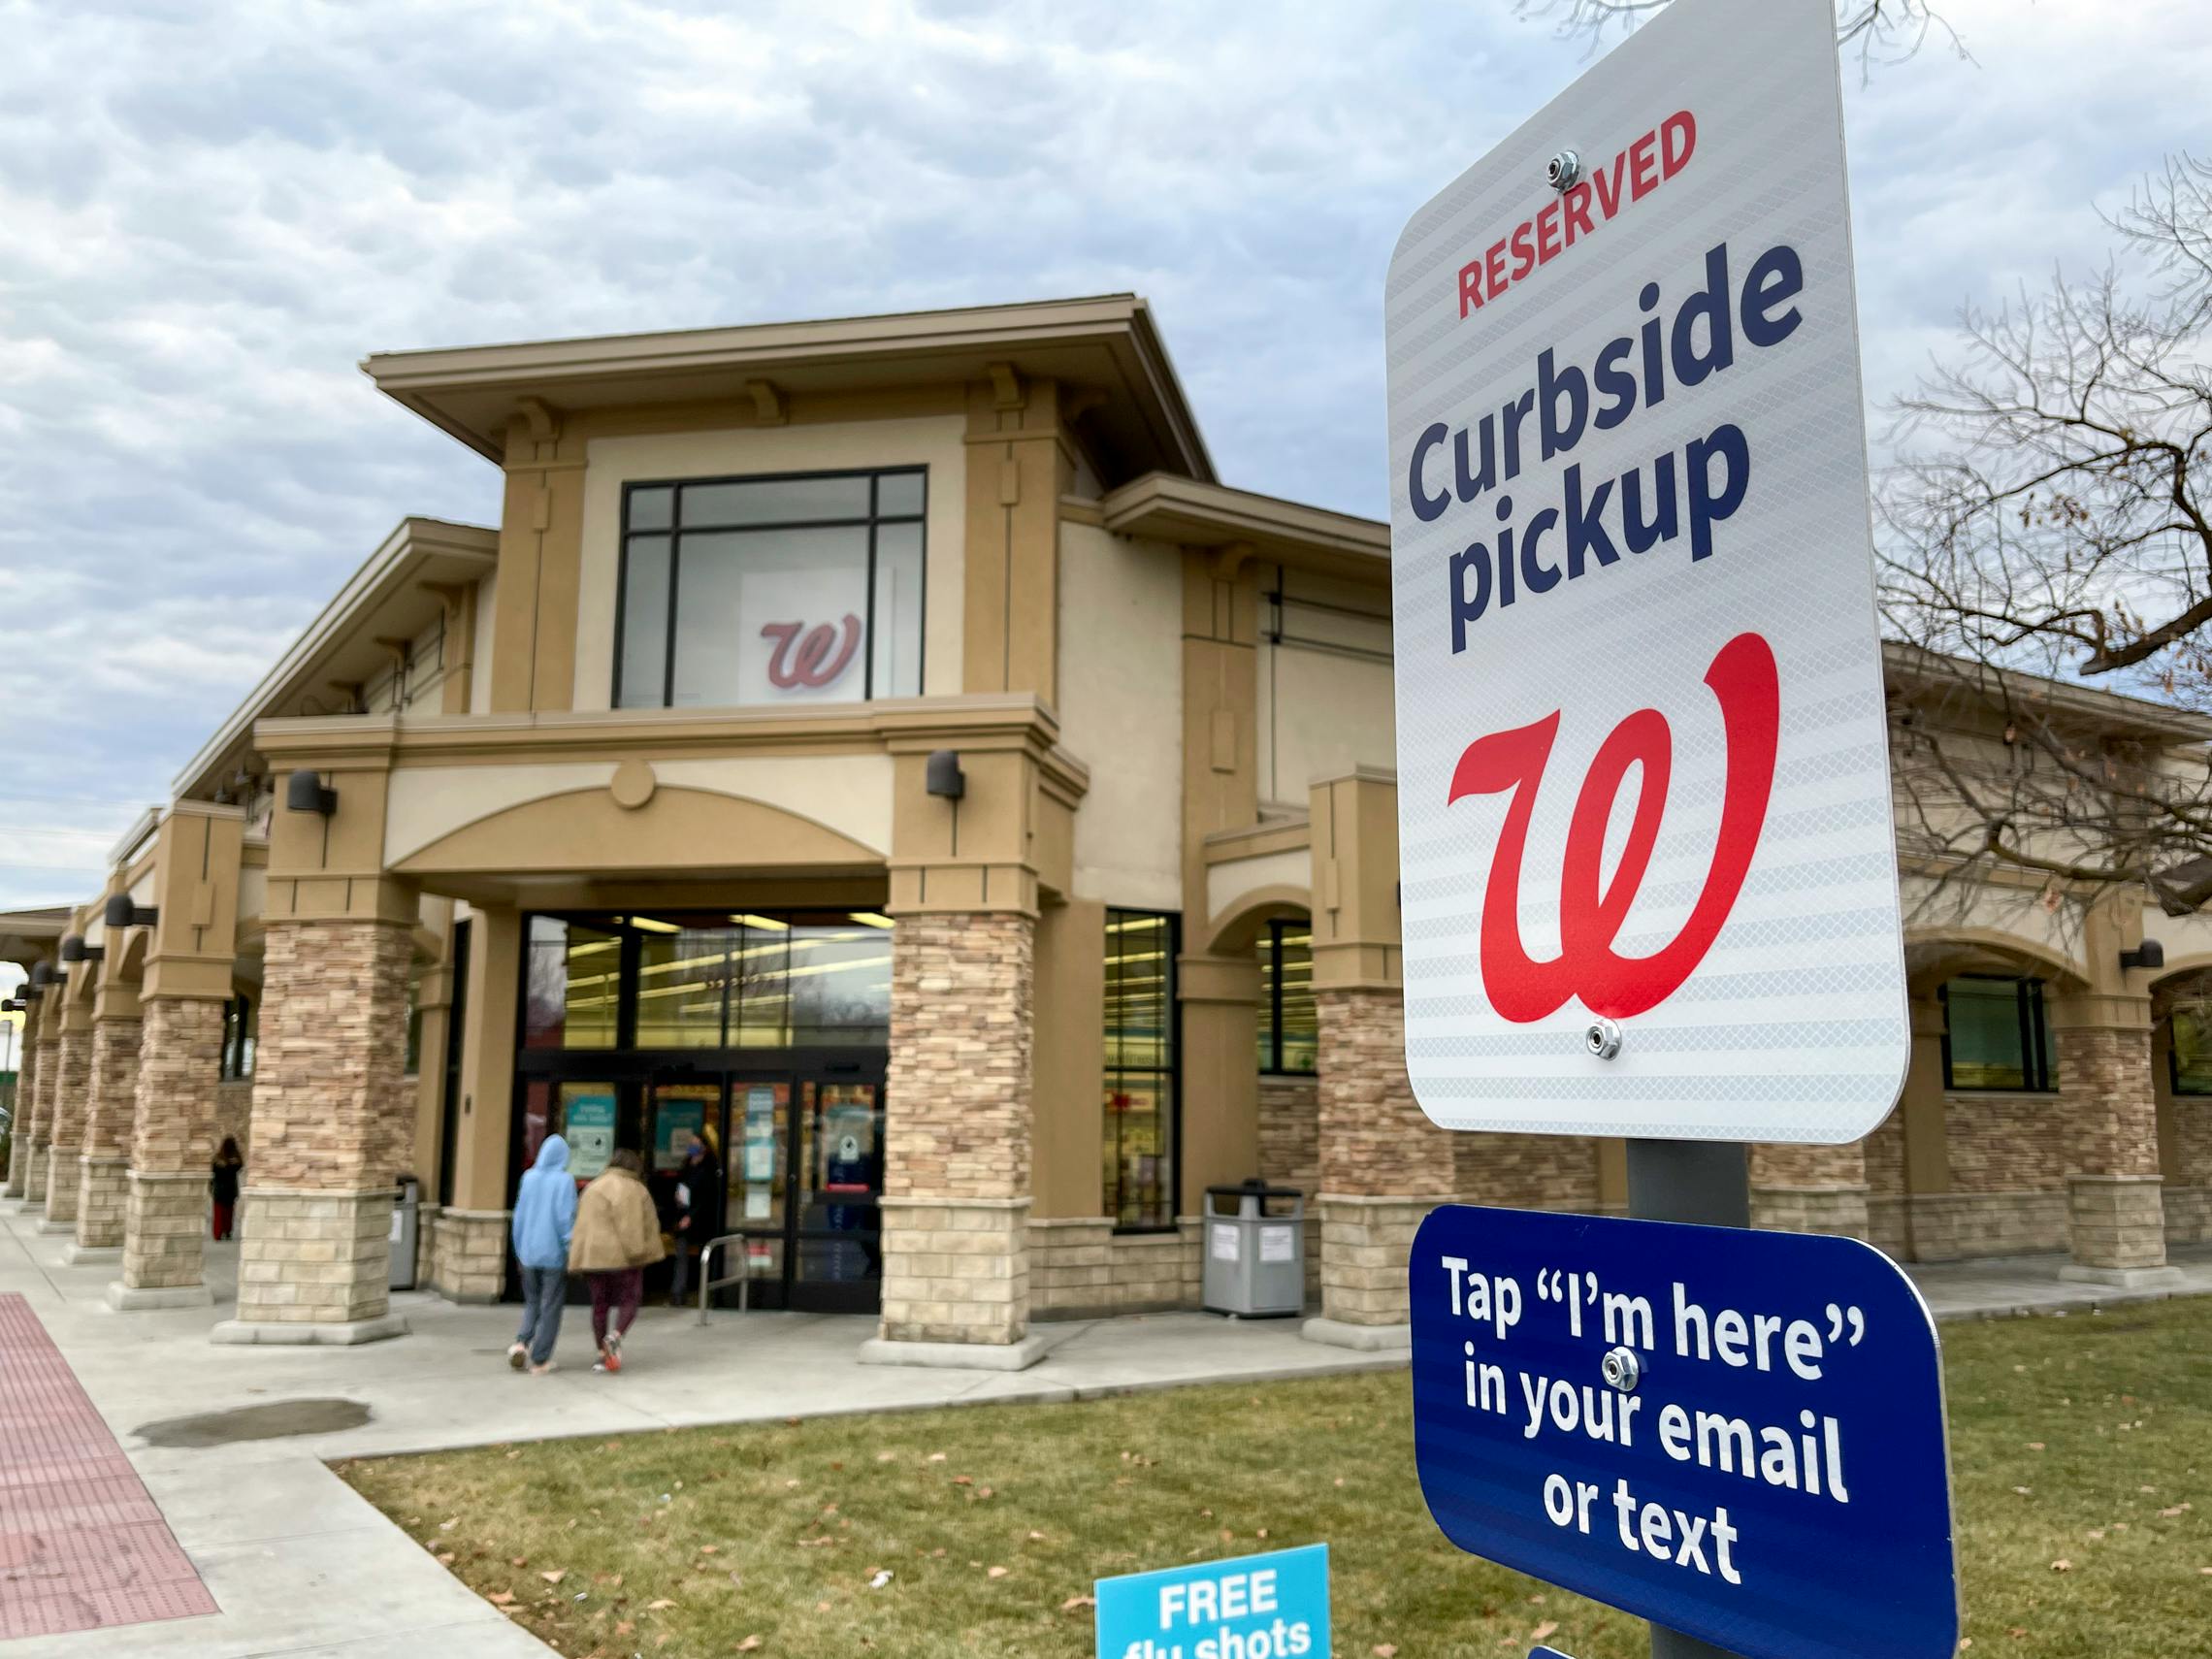 A curbside pickup sign in front of Walgreens.